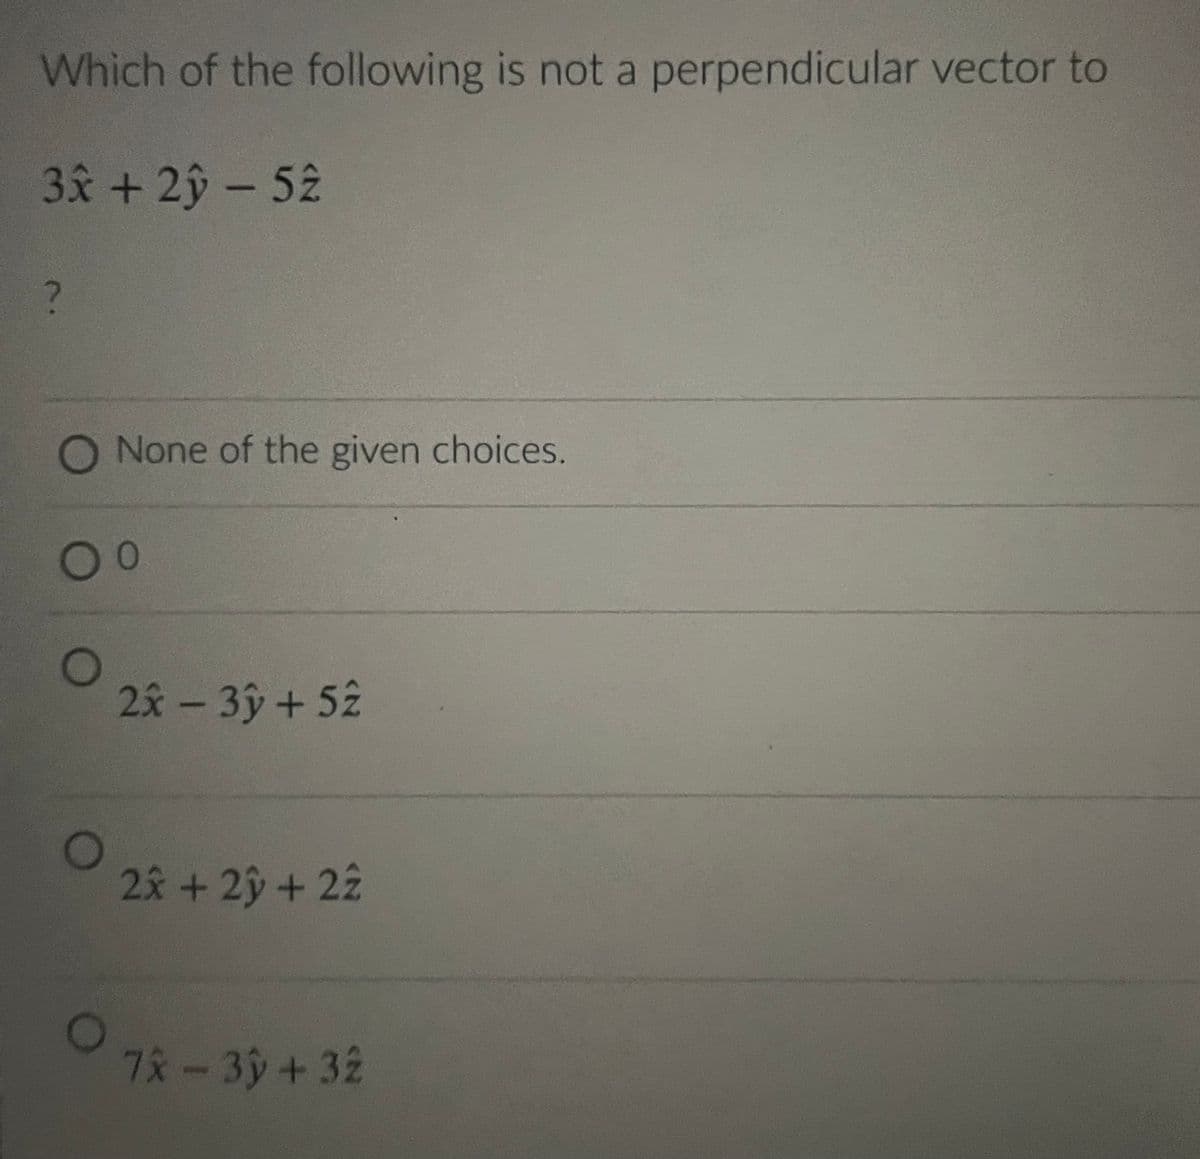 Which of the following is not a perpendicular vector to
3x + 2y - 52
?
O None of the given choices.
0 0
2x - 3y + 52
2x + 2y + 22
7x - 3y + 32